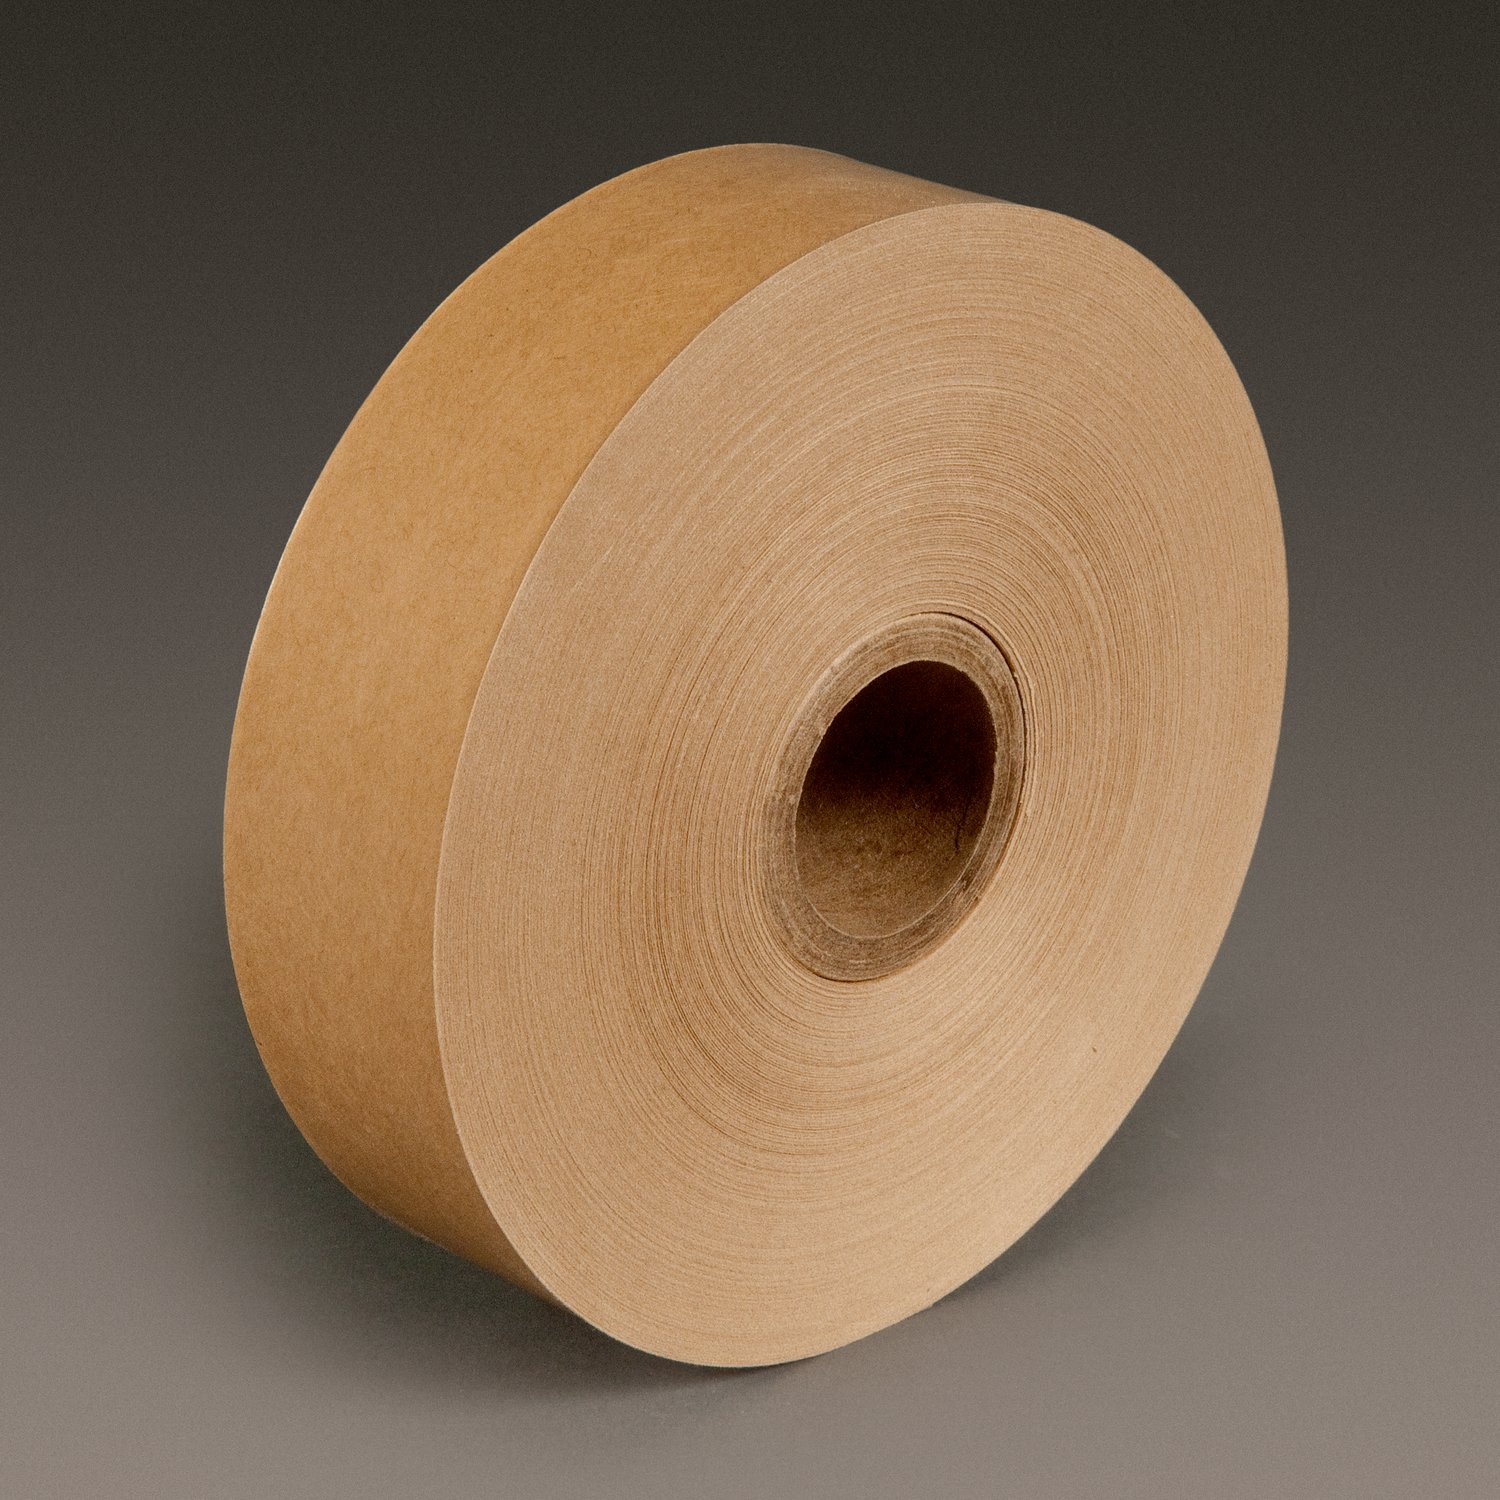 7000124809 - 3M Water Activated Paper Tape 6141, Natural, Light Duty, 1-1/2 in x 500
ft, 20/Case